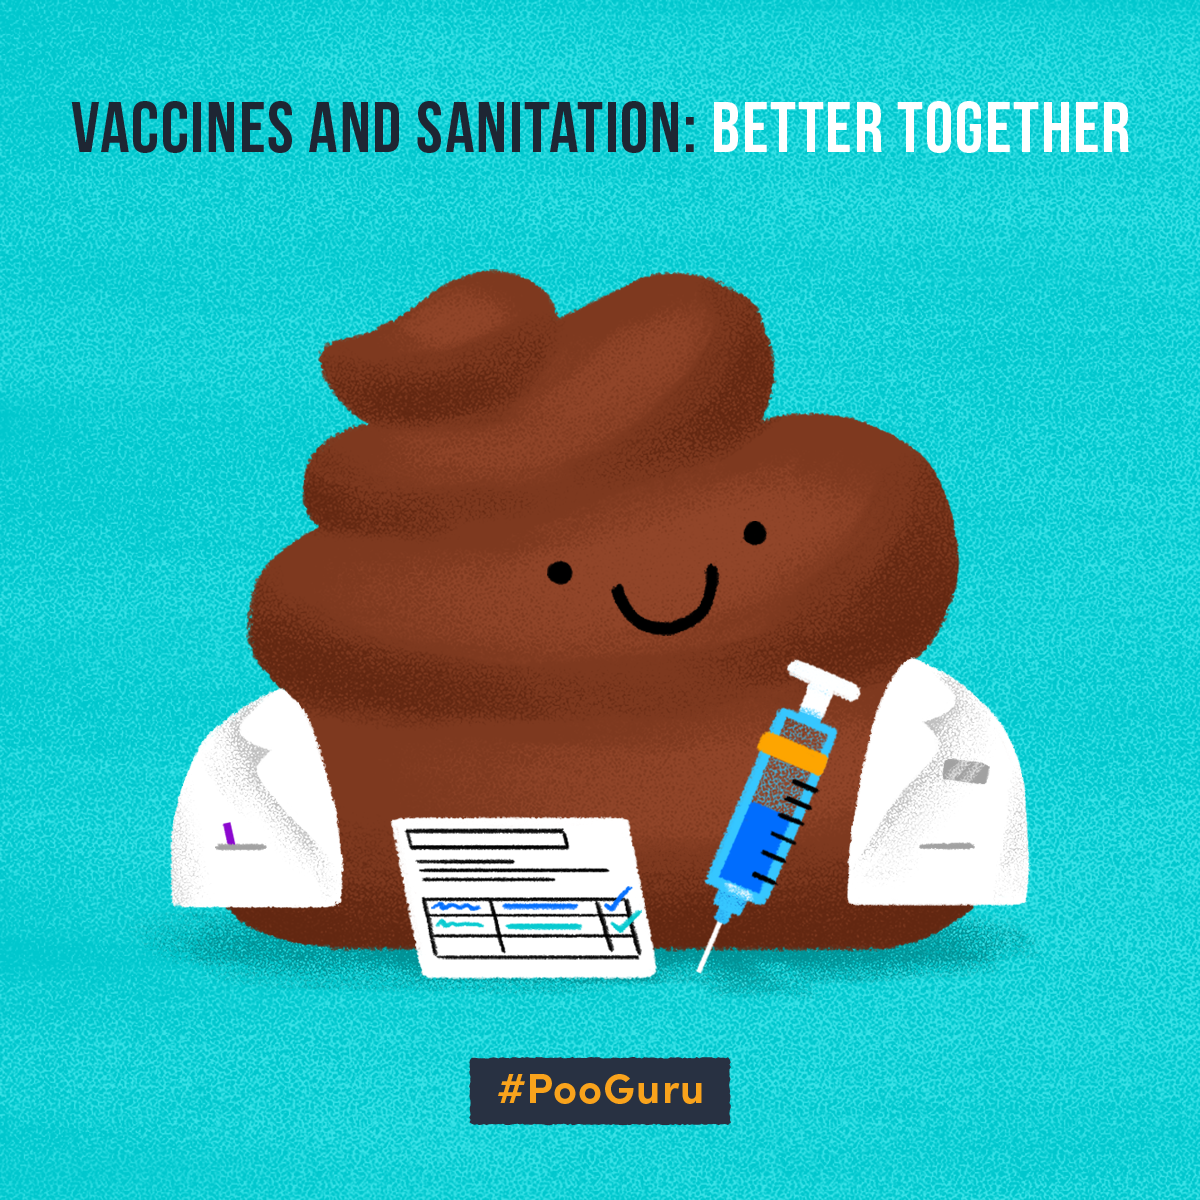 character depicting sanitation and vaccines